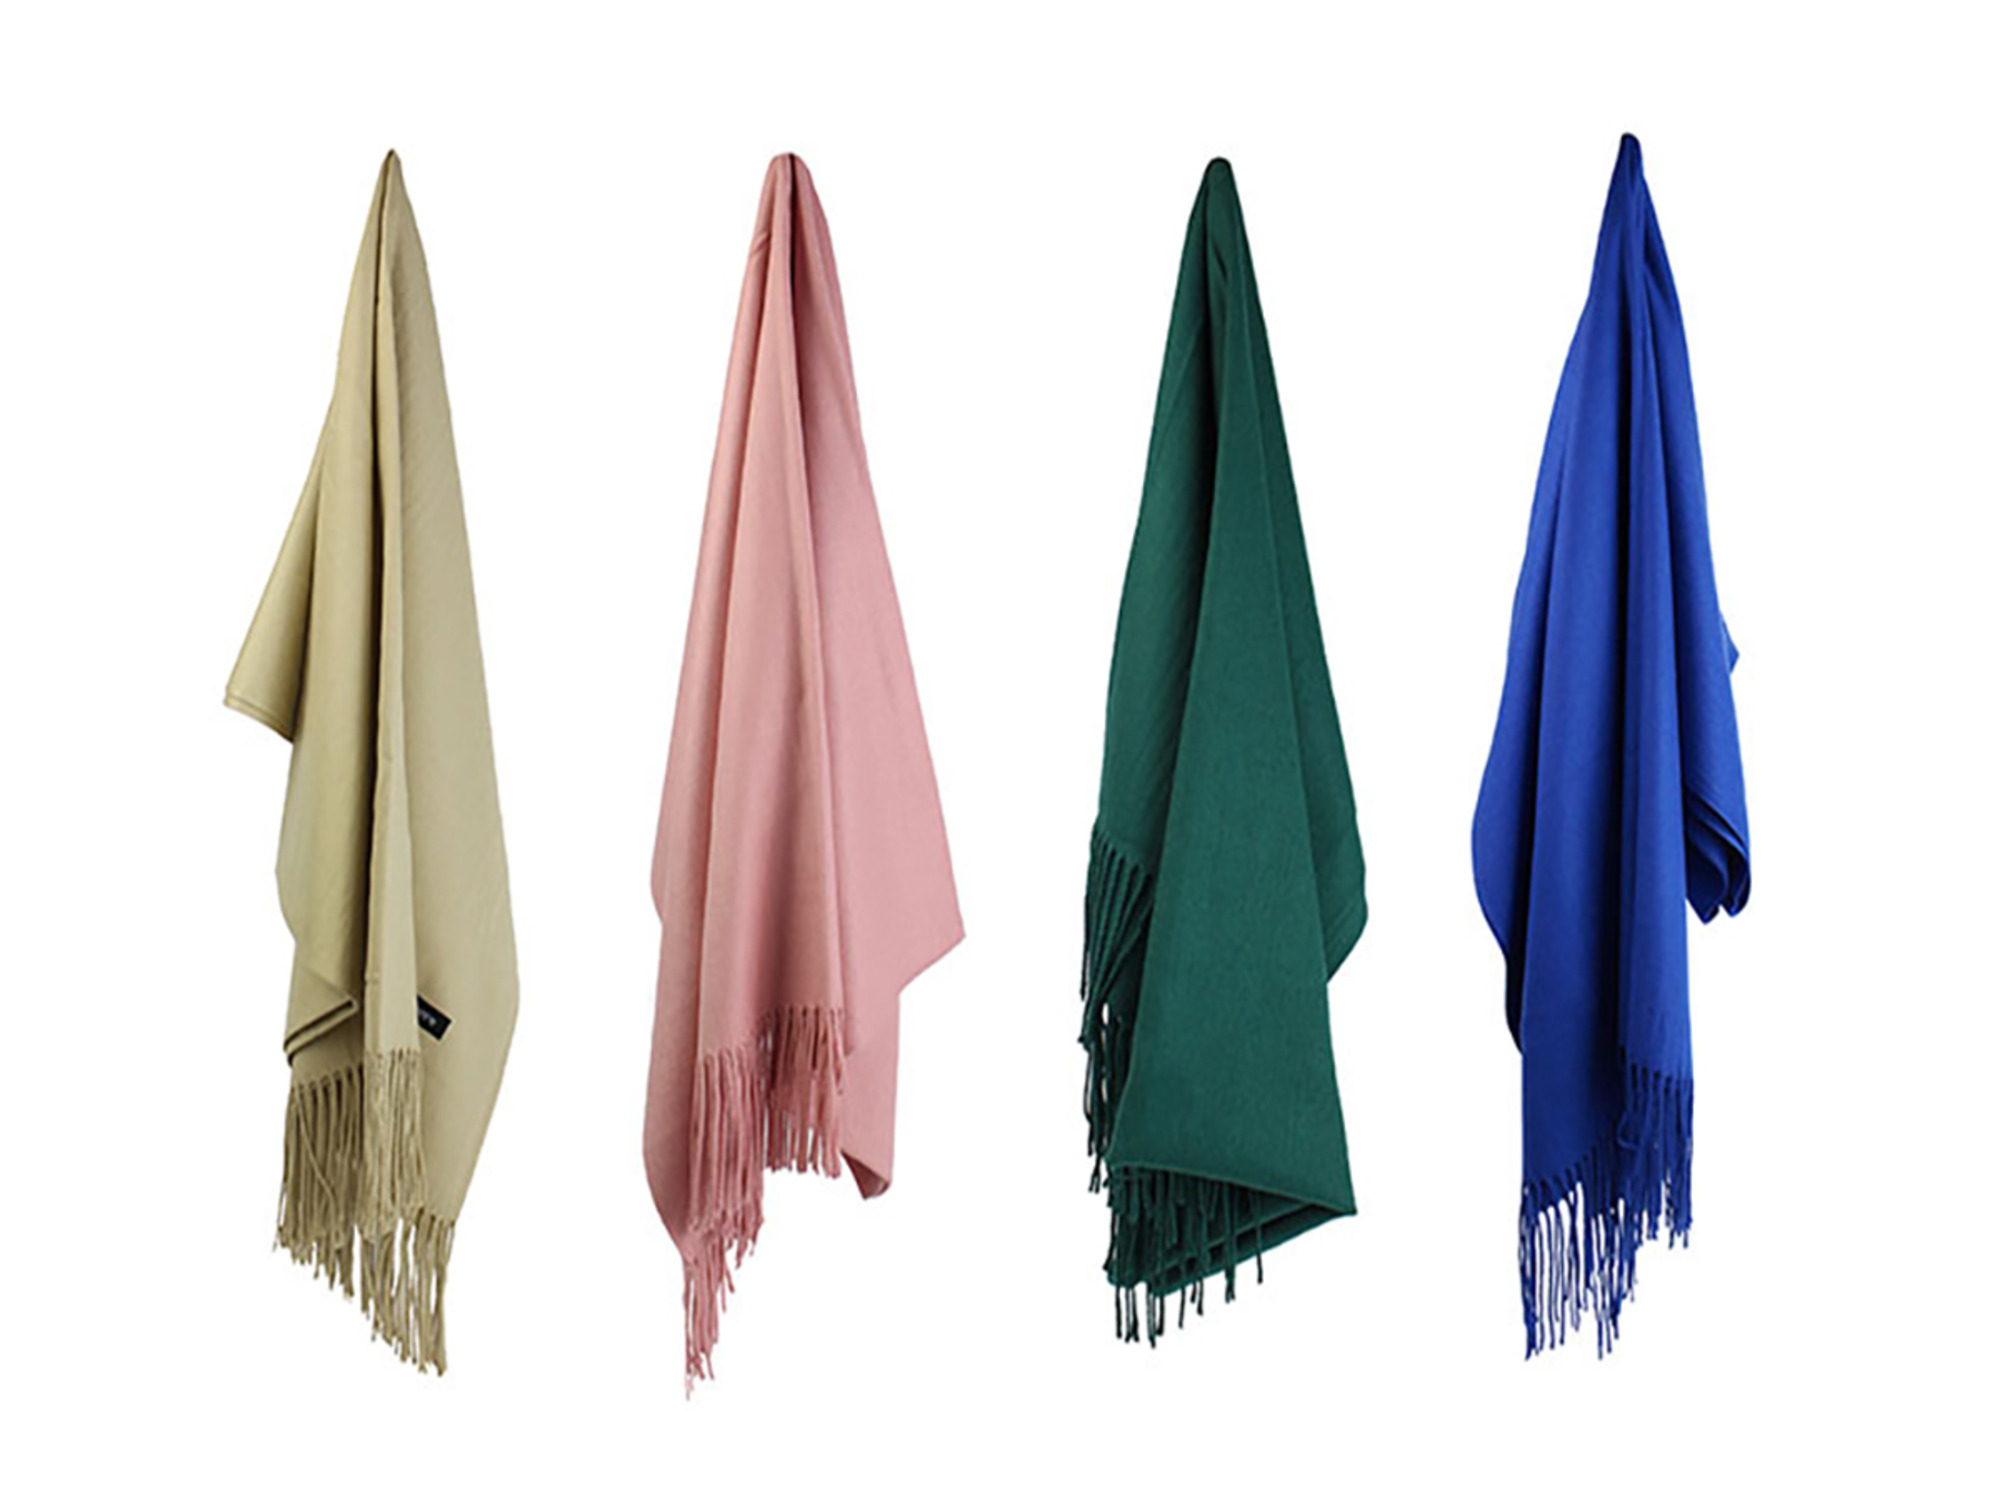 Get this cashmere blend shawl for $15 ahead of Mother’s Day